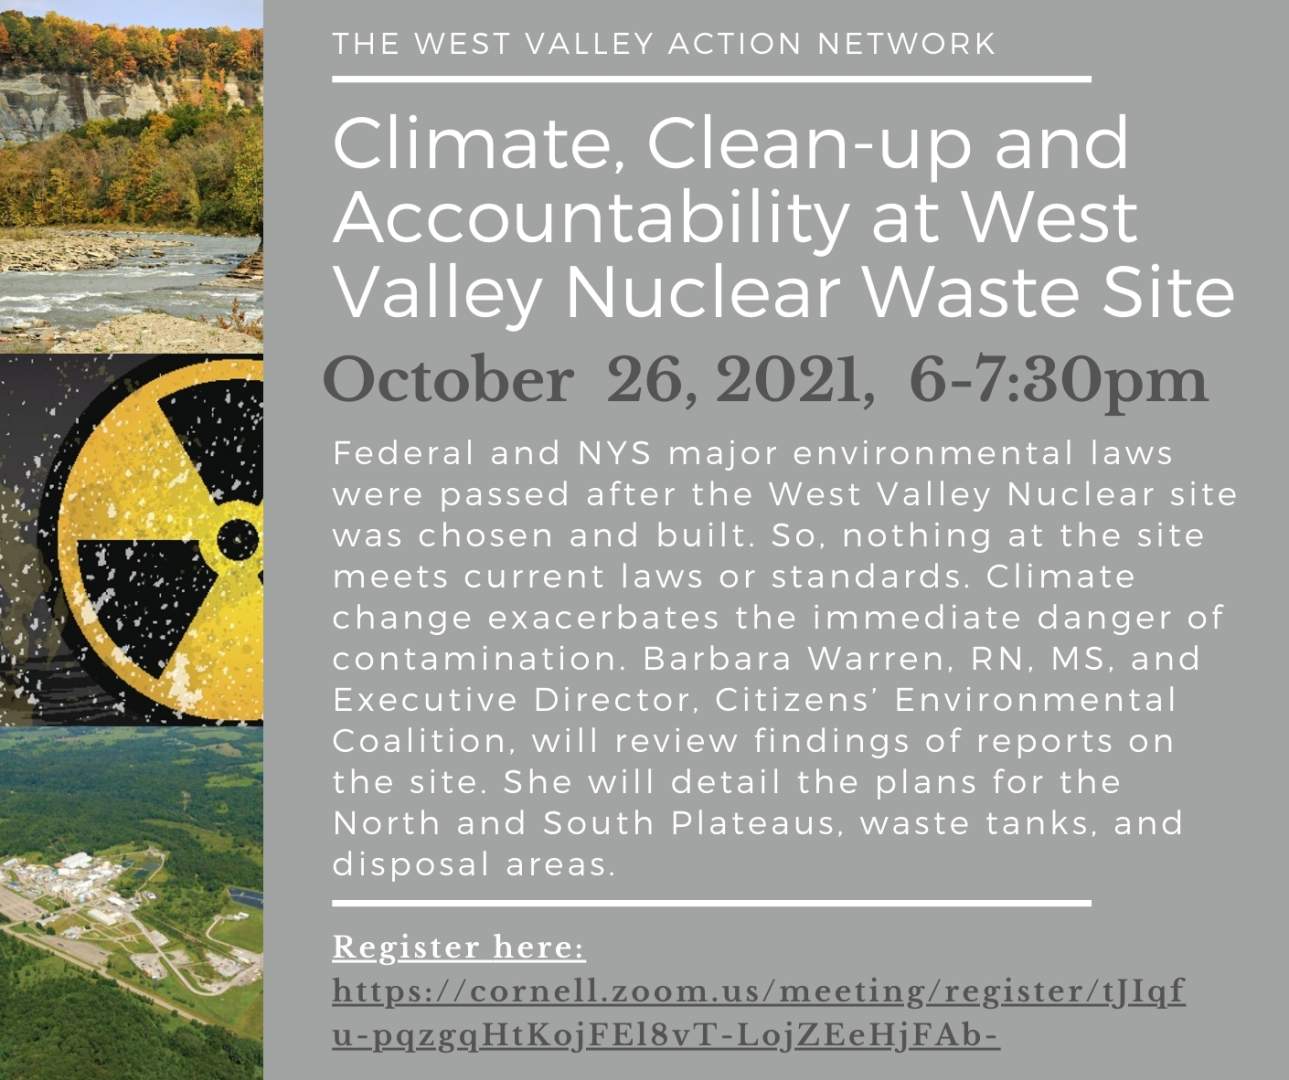 Climate, Clean-up and Accountability at the West Valley Nuclear Waste Site in 2021